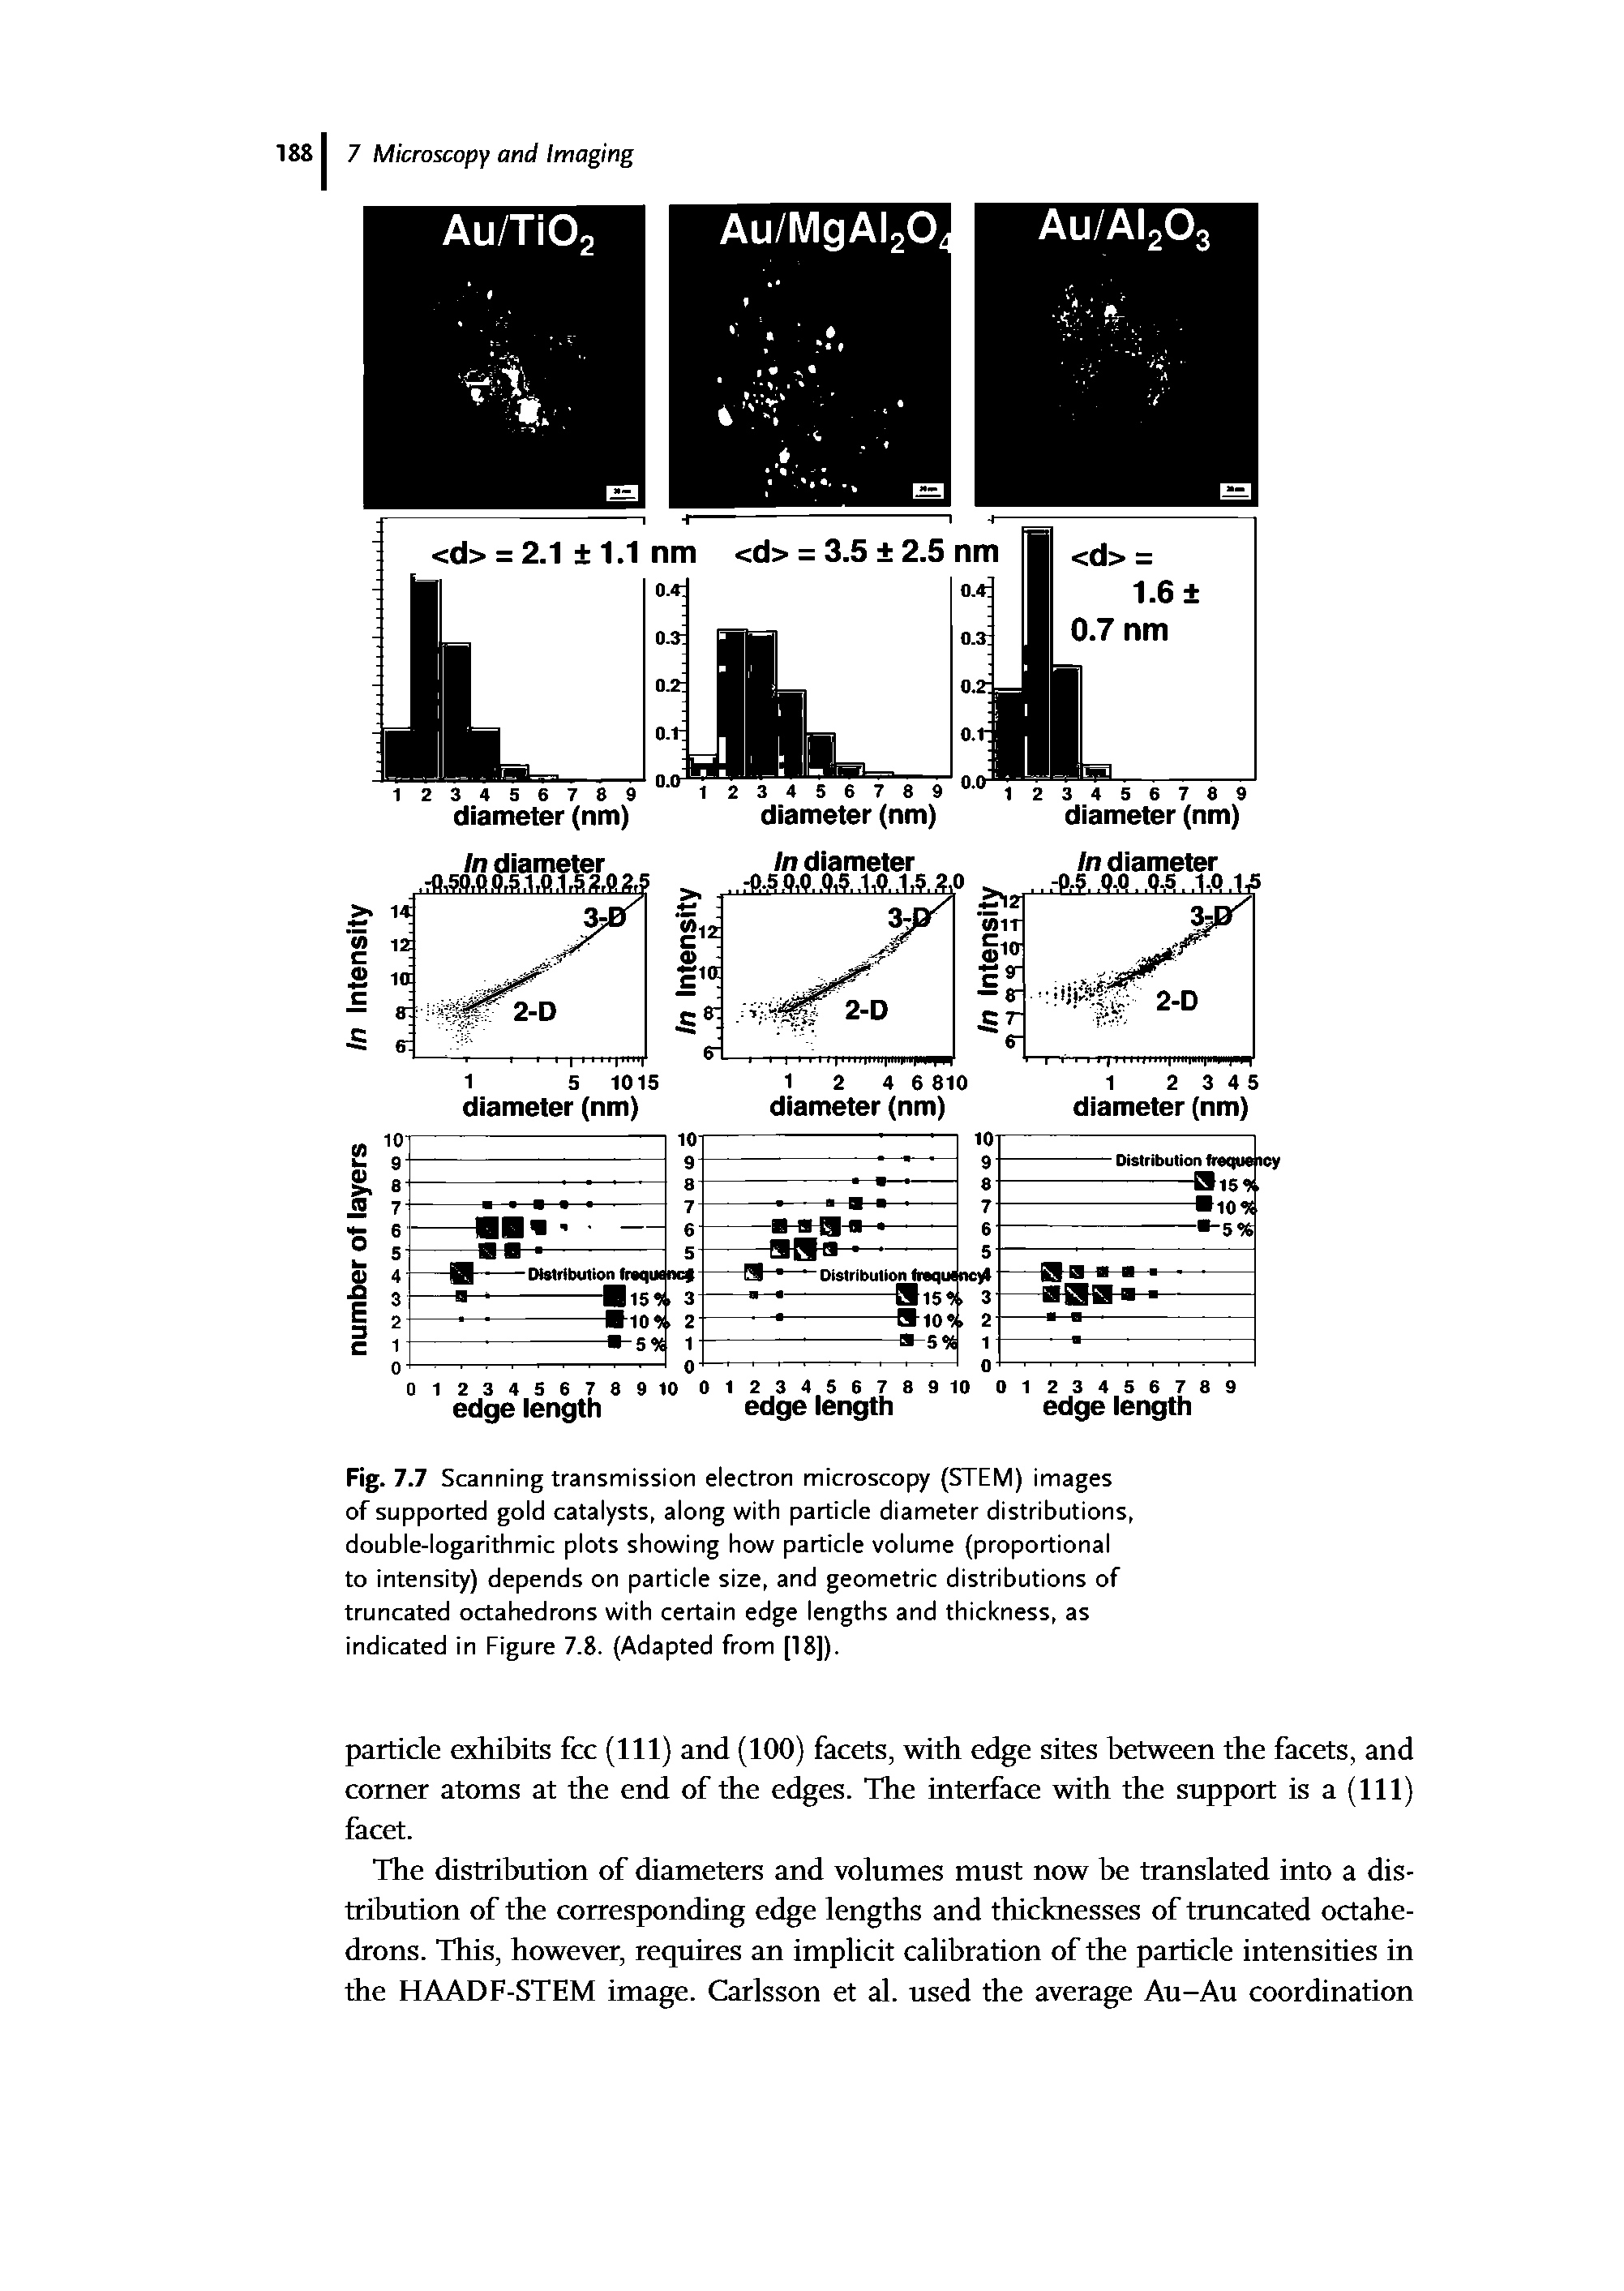 Fig. 7.7 Scanning transmission electron microscopy (STEM) images of supported gold catalysts, along with particle diameter distributions, double-logarithmic plots showing how particle volume (proportional to intensity) depends on particle size, and geometric distributions of truncated octahedrons with certain edge lengths and thickness, as indicated in Figure 7.8. (Adapted from [18]).